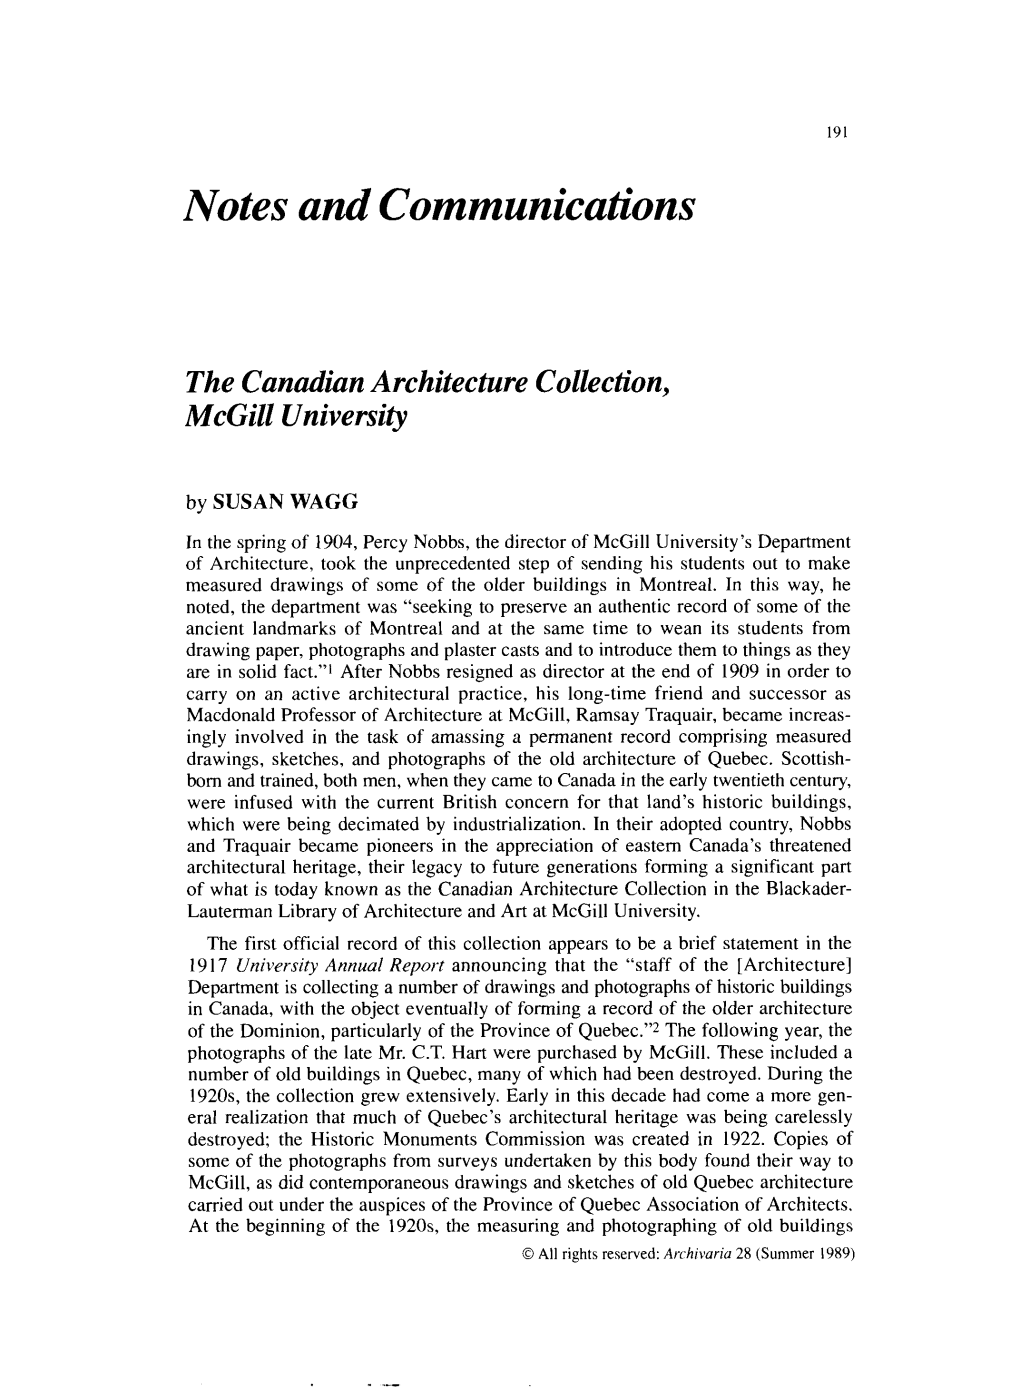 Notes and Communications the Canadian Architecture